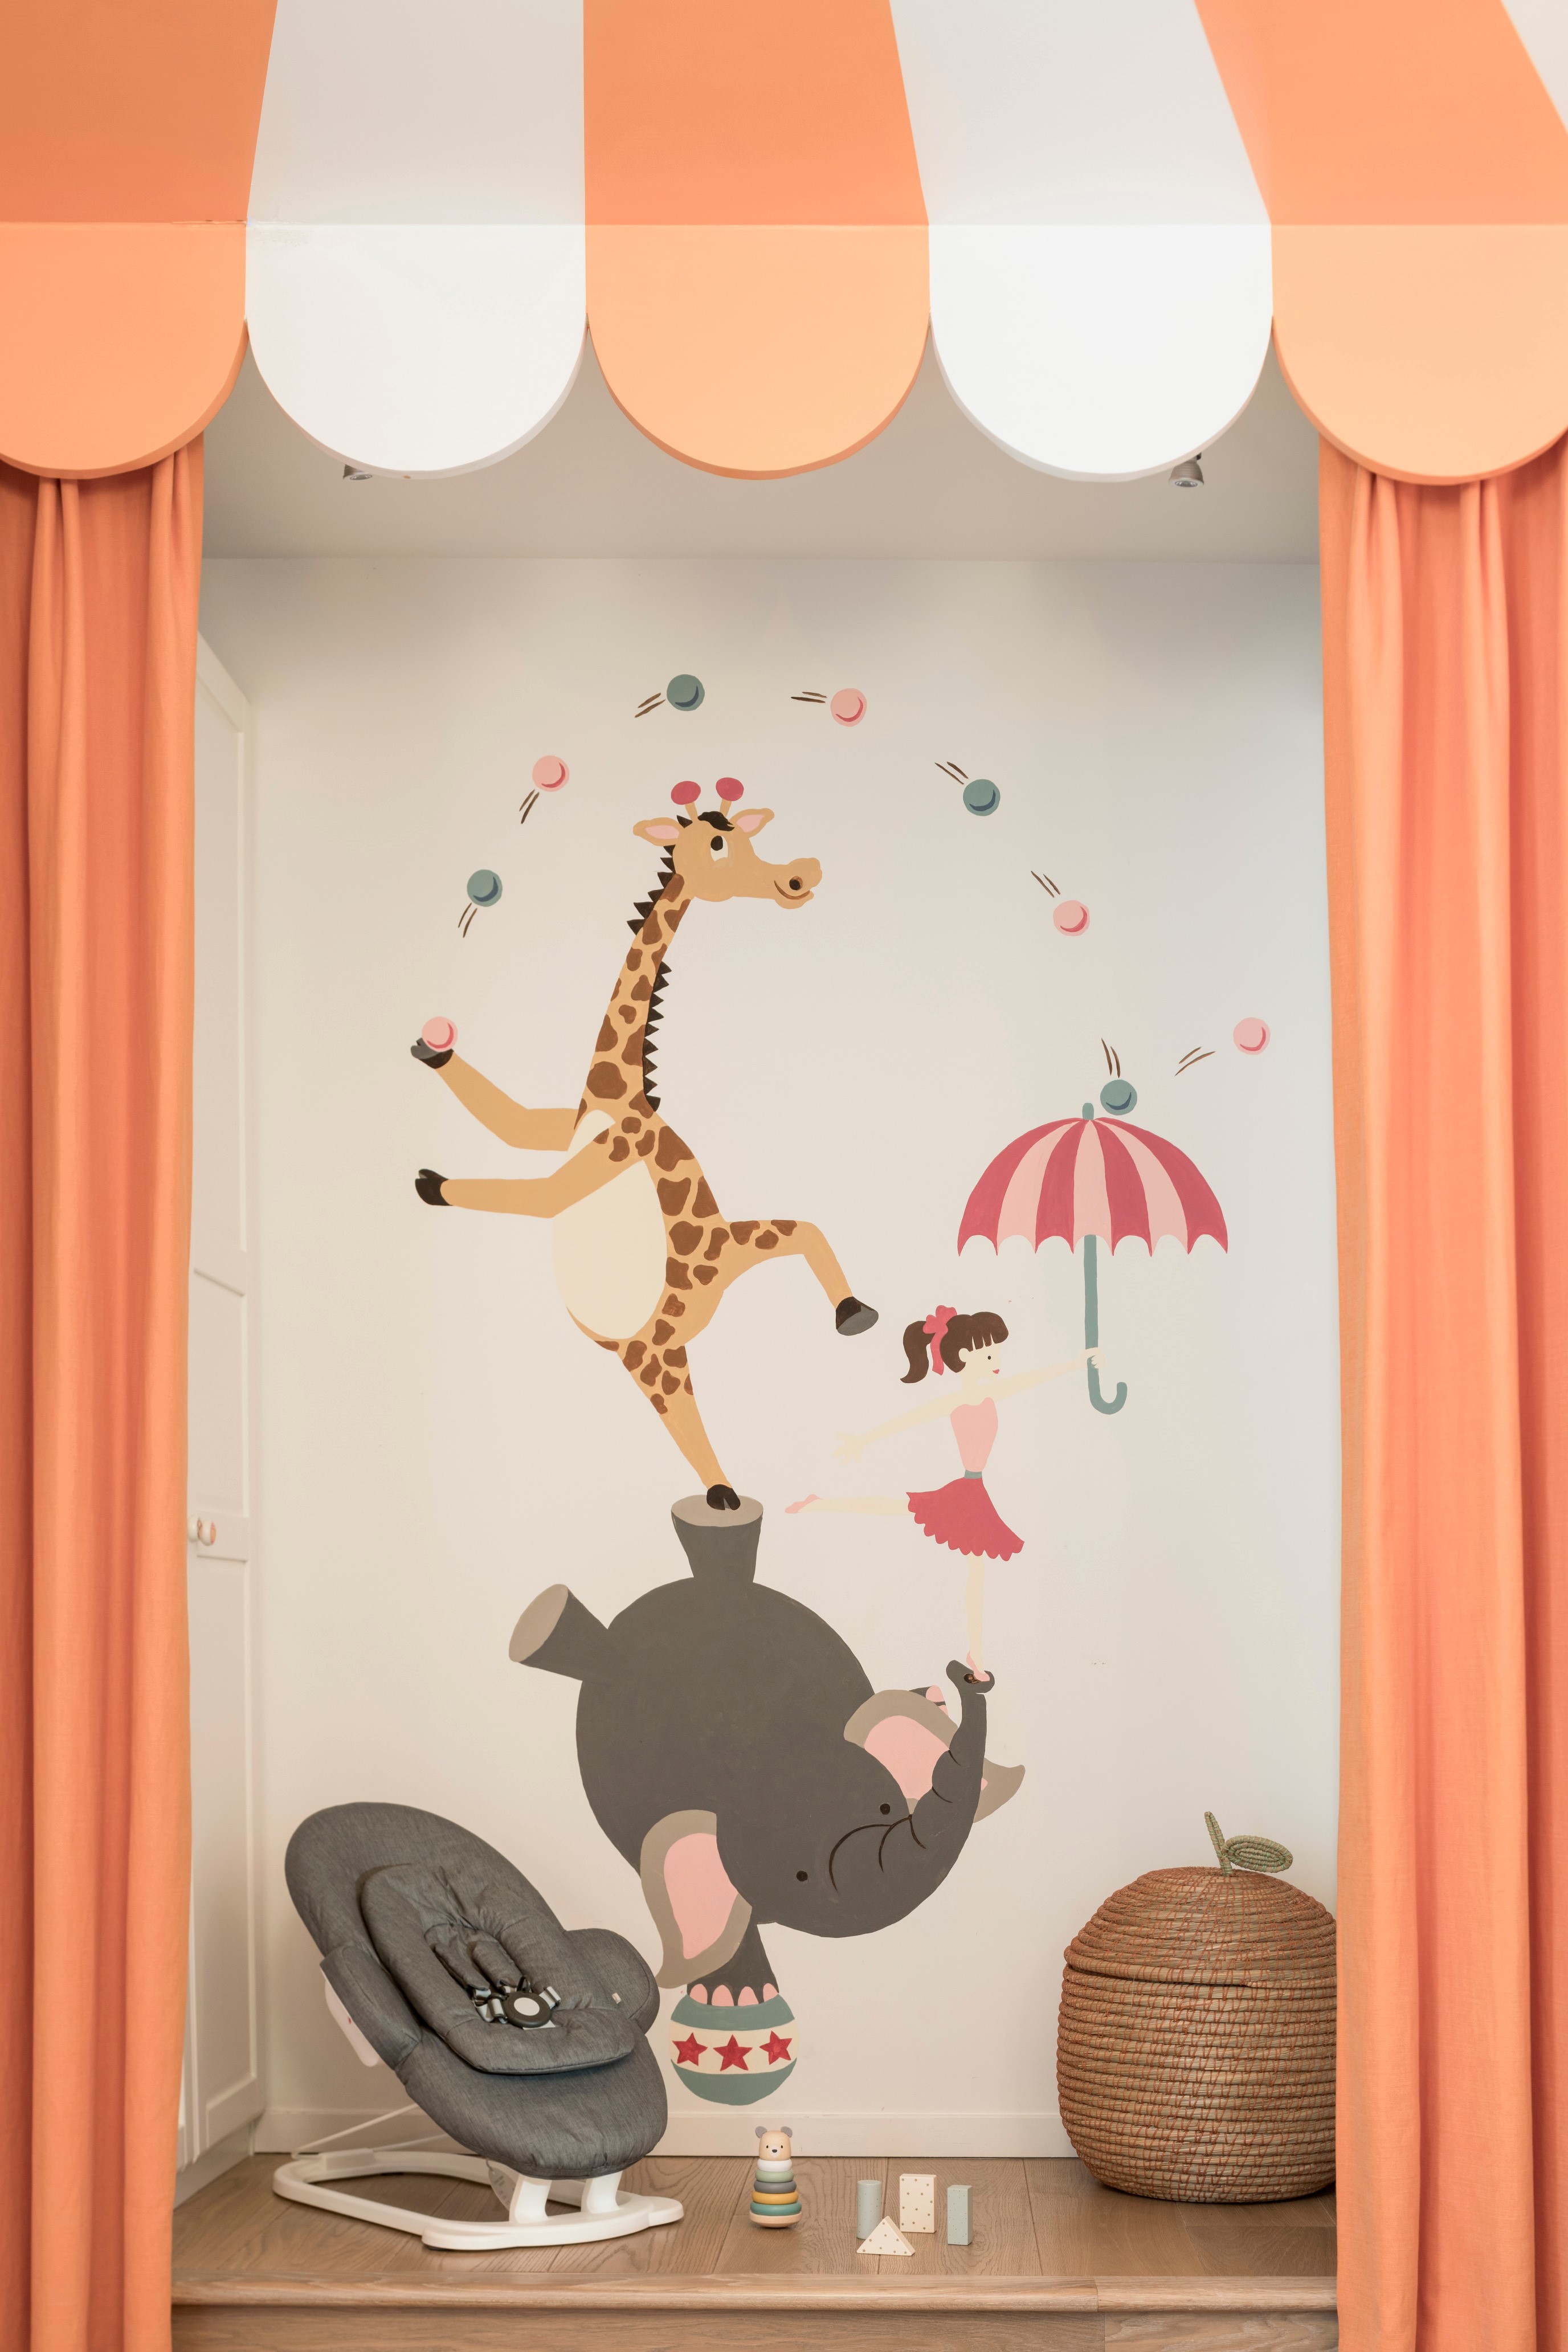 A chair in front of children's circus wallpaper (Tripp Trapp/PA)